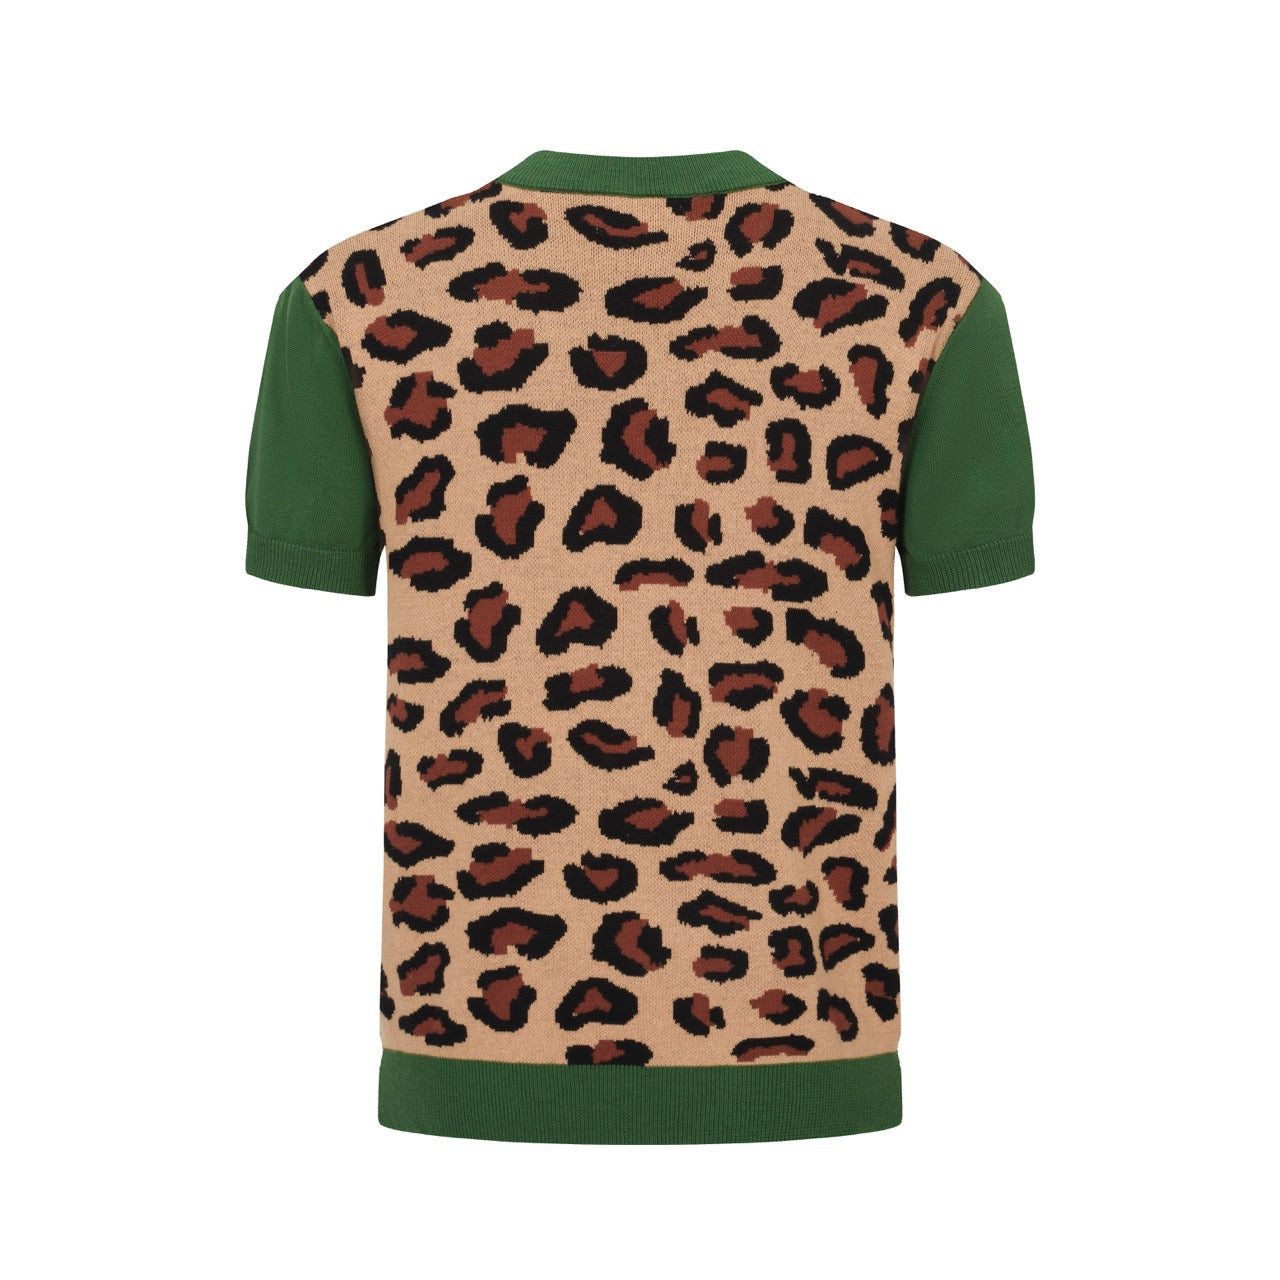 Men's Green & Brown Round Neck Knitted T-Shirt